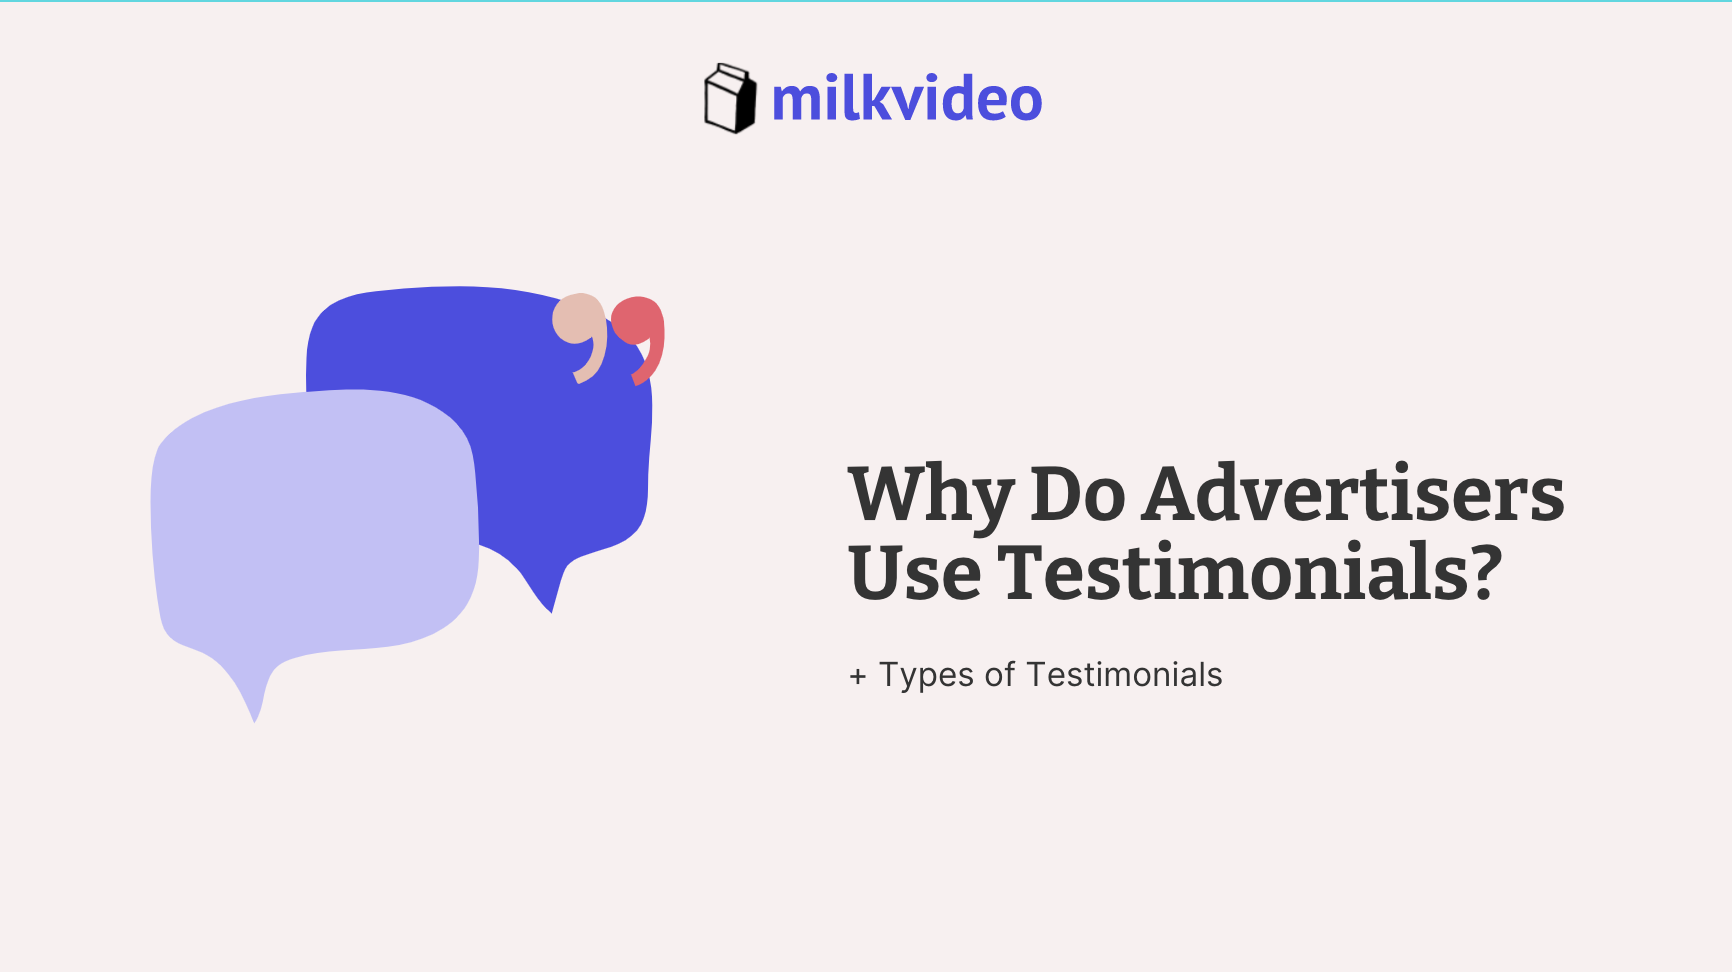 Why Do Advertisers Use Testimonials?